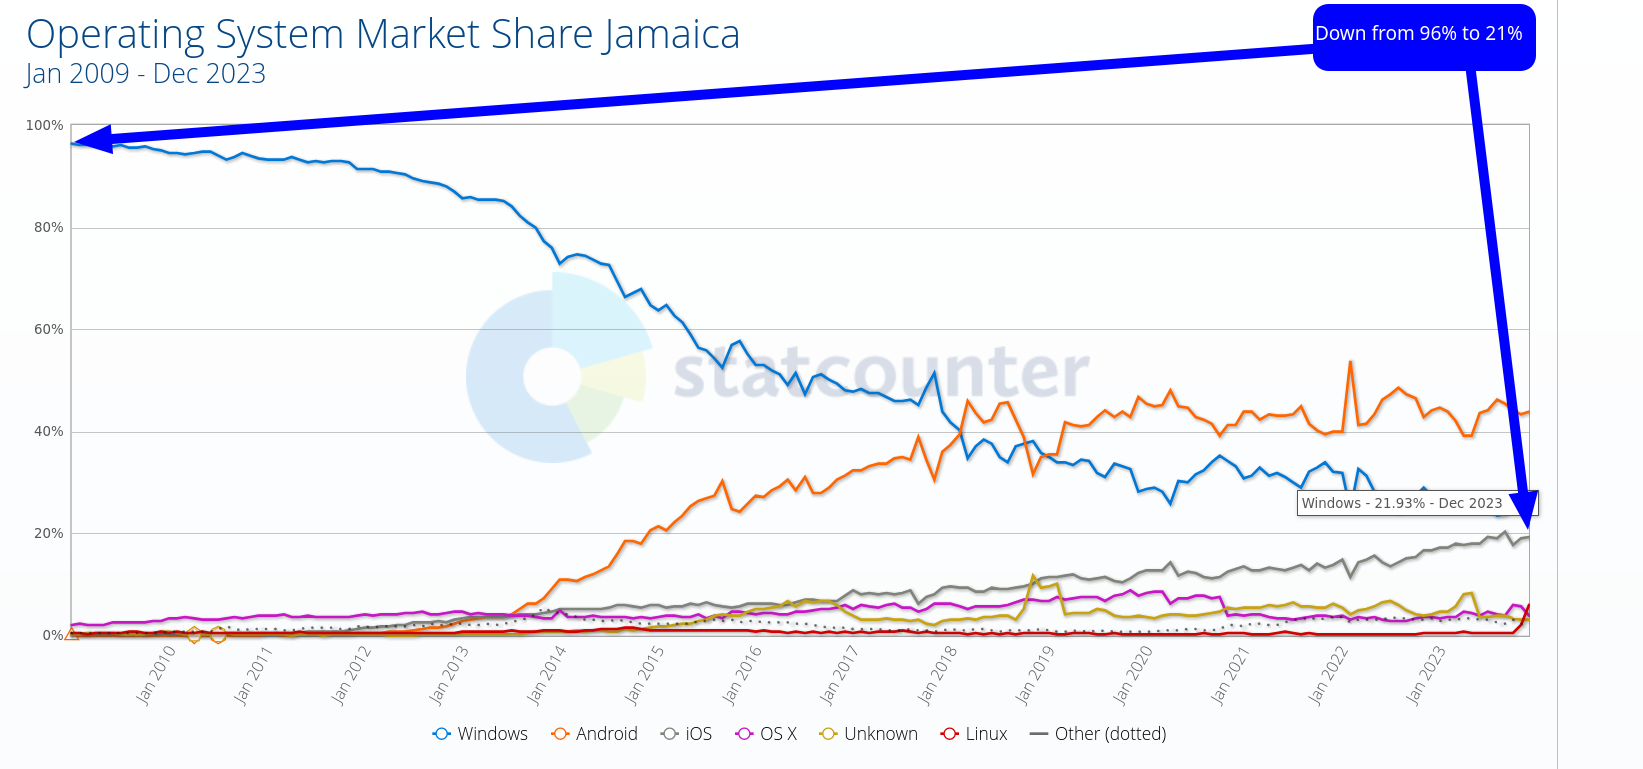 Operating System Market Share Jamaica: Down from 96% to 21%